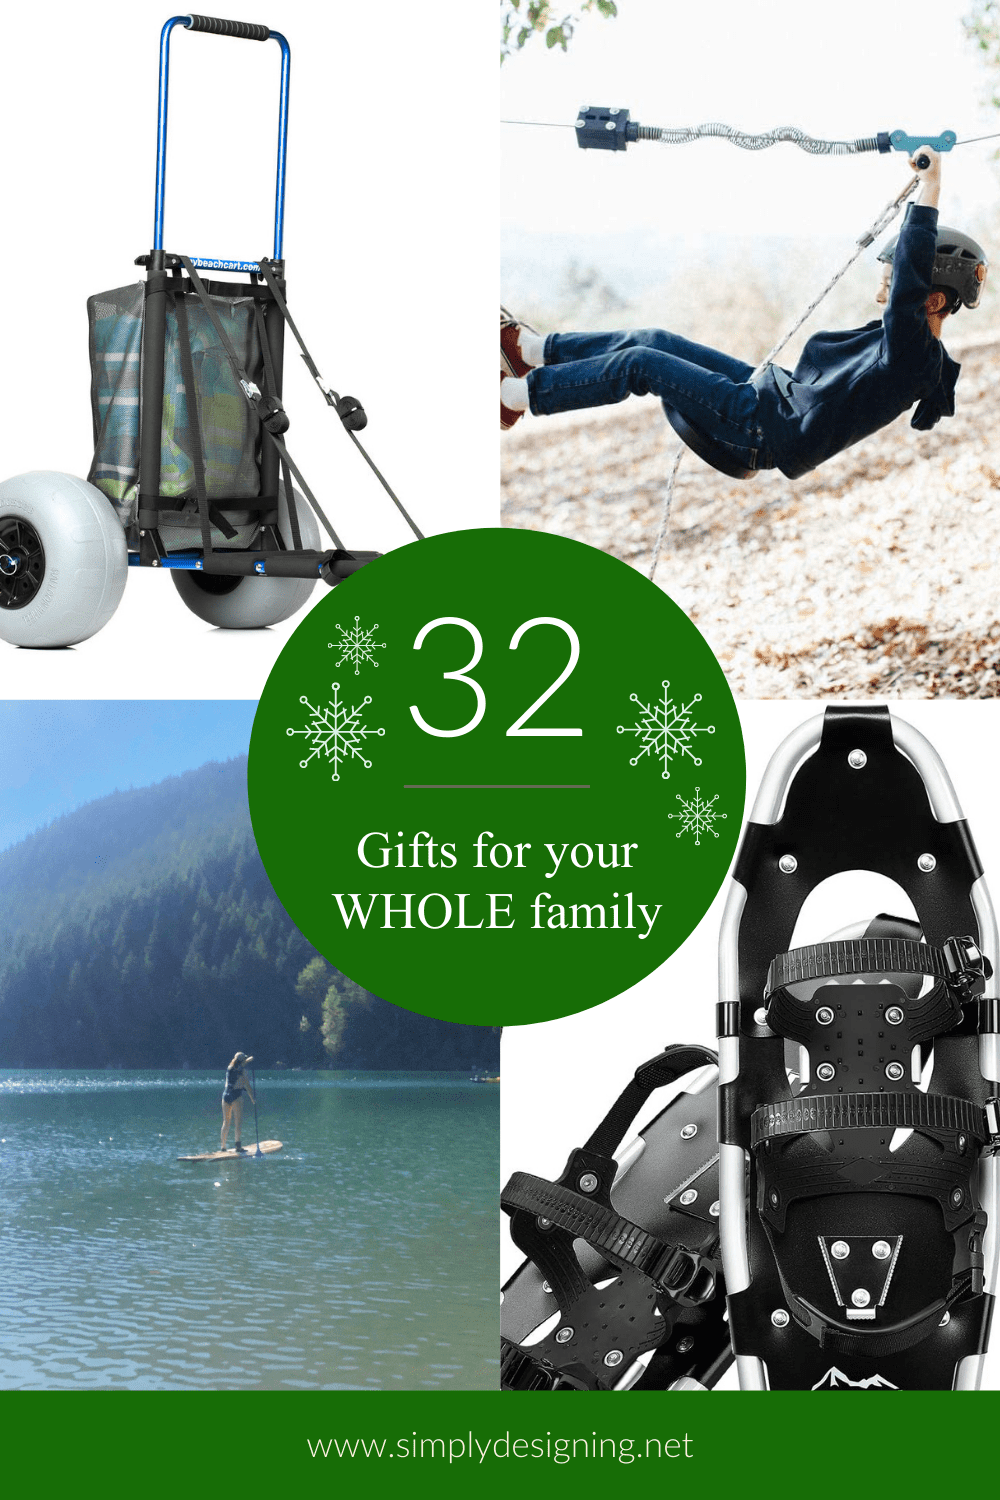 This is the most comprehensive family holiday gift guide that is perfect for the family who wants to spend more time together and create family memories.